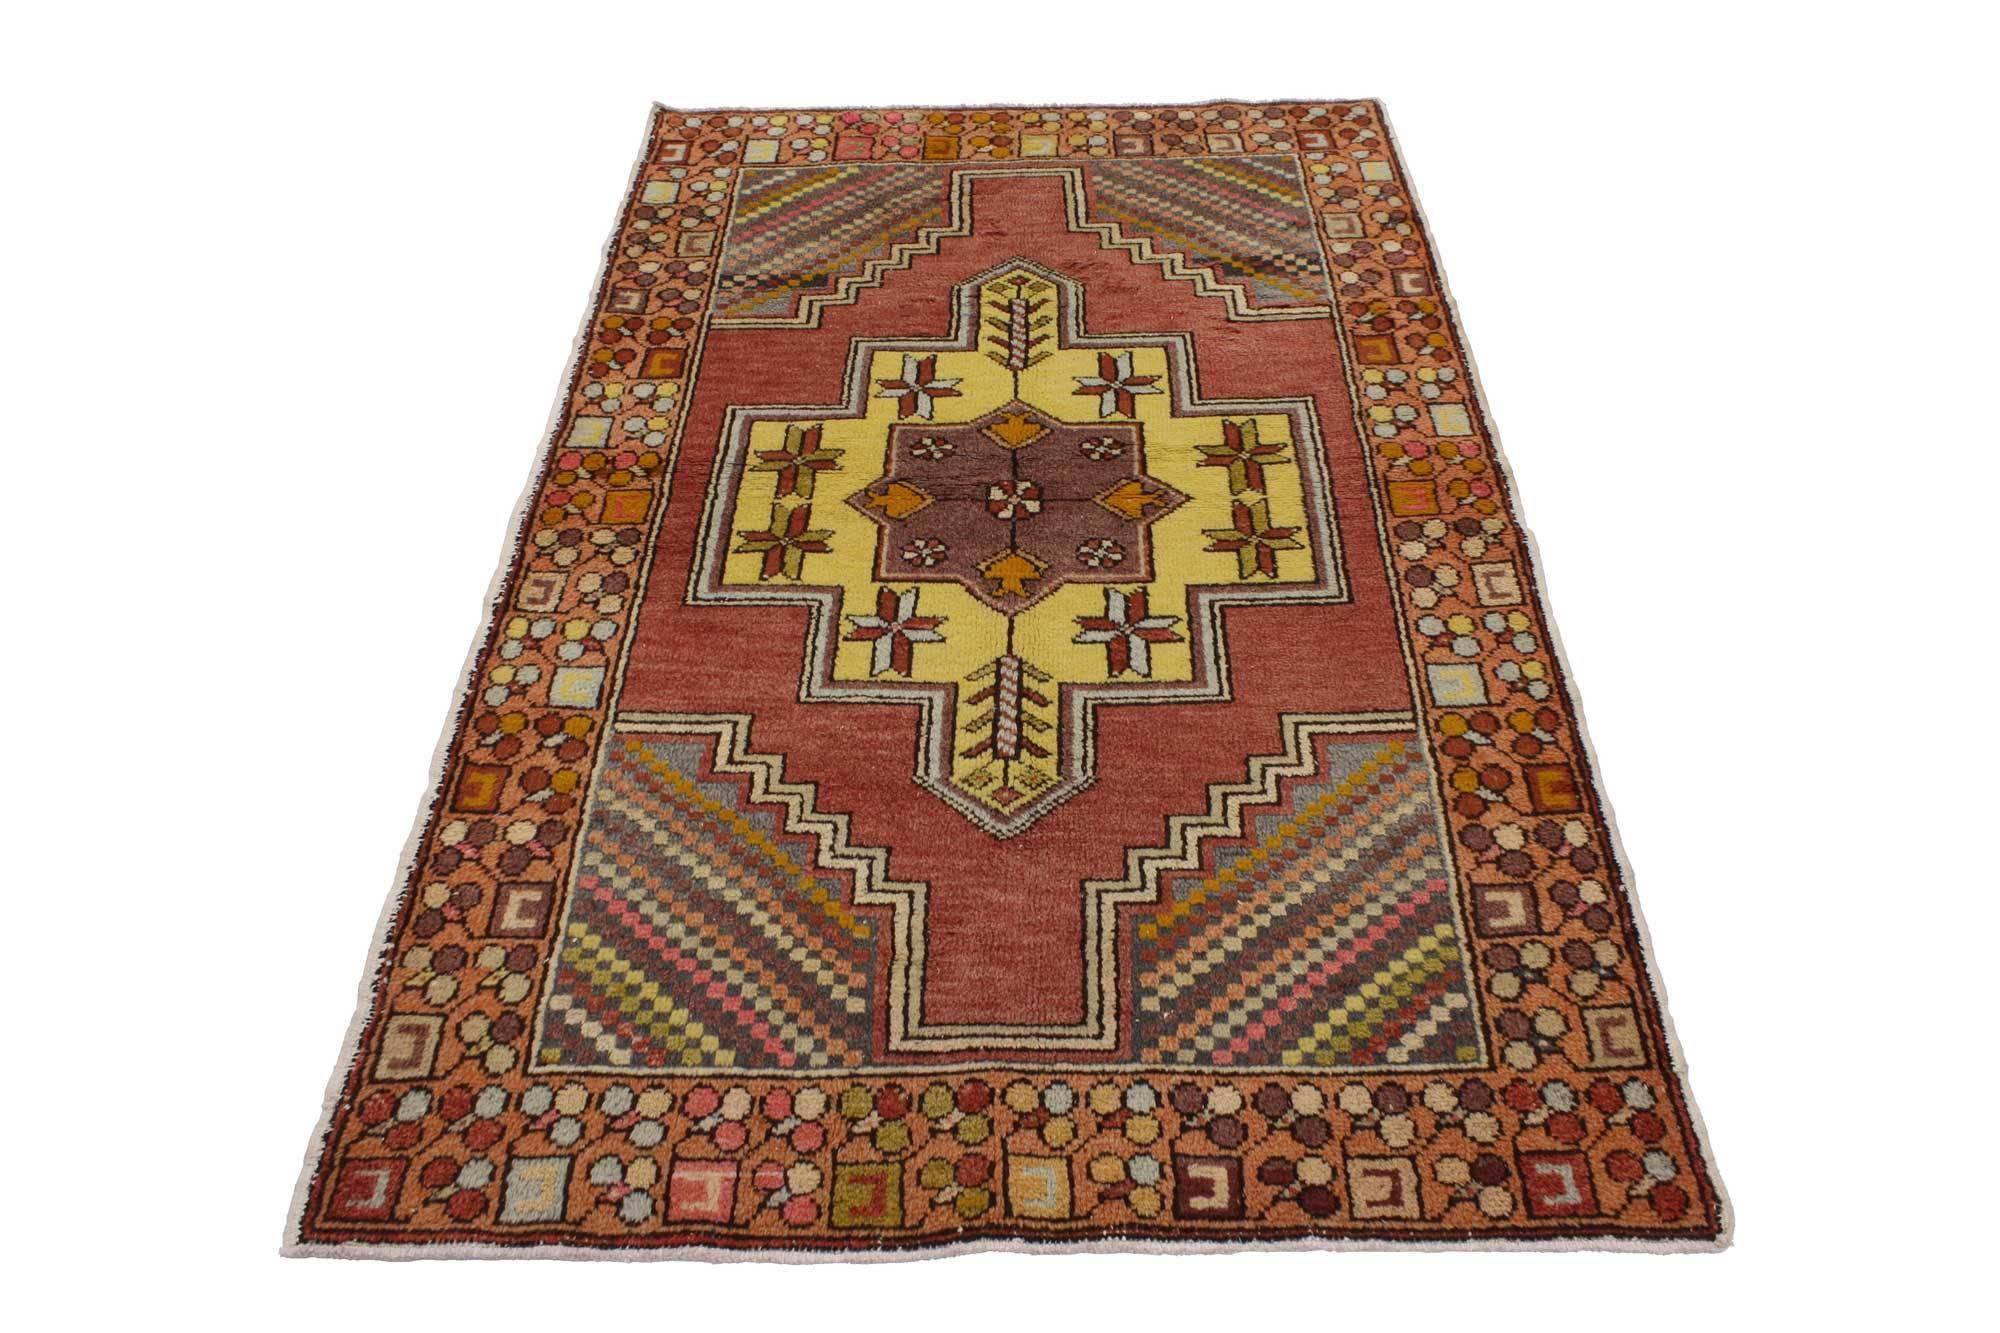 51774, vintage Turkish Oushak accent rug, entry or foyer rug. This hand-knotted wool vintage Turkish Oushak rug features a modern traditional style. Immersed in Anatolian history and refined colors, this vintage Oushak rug combines simplicity with